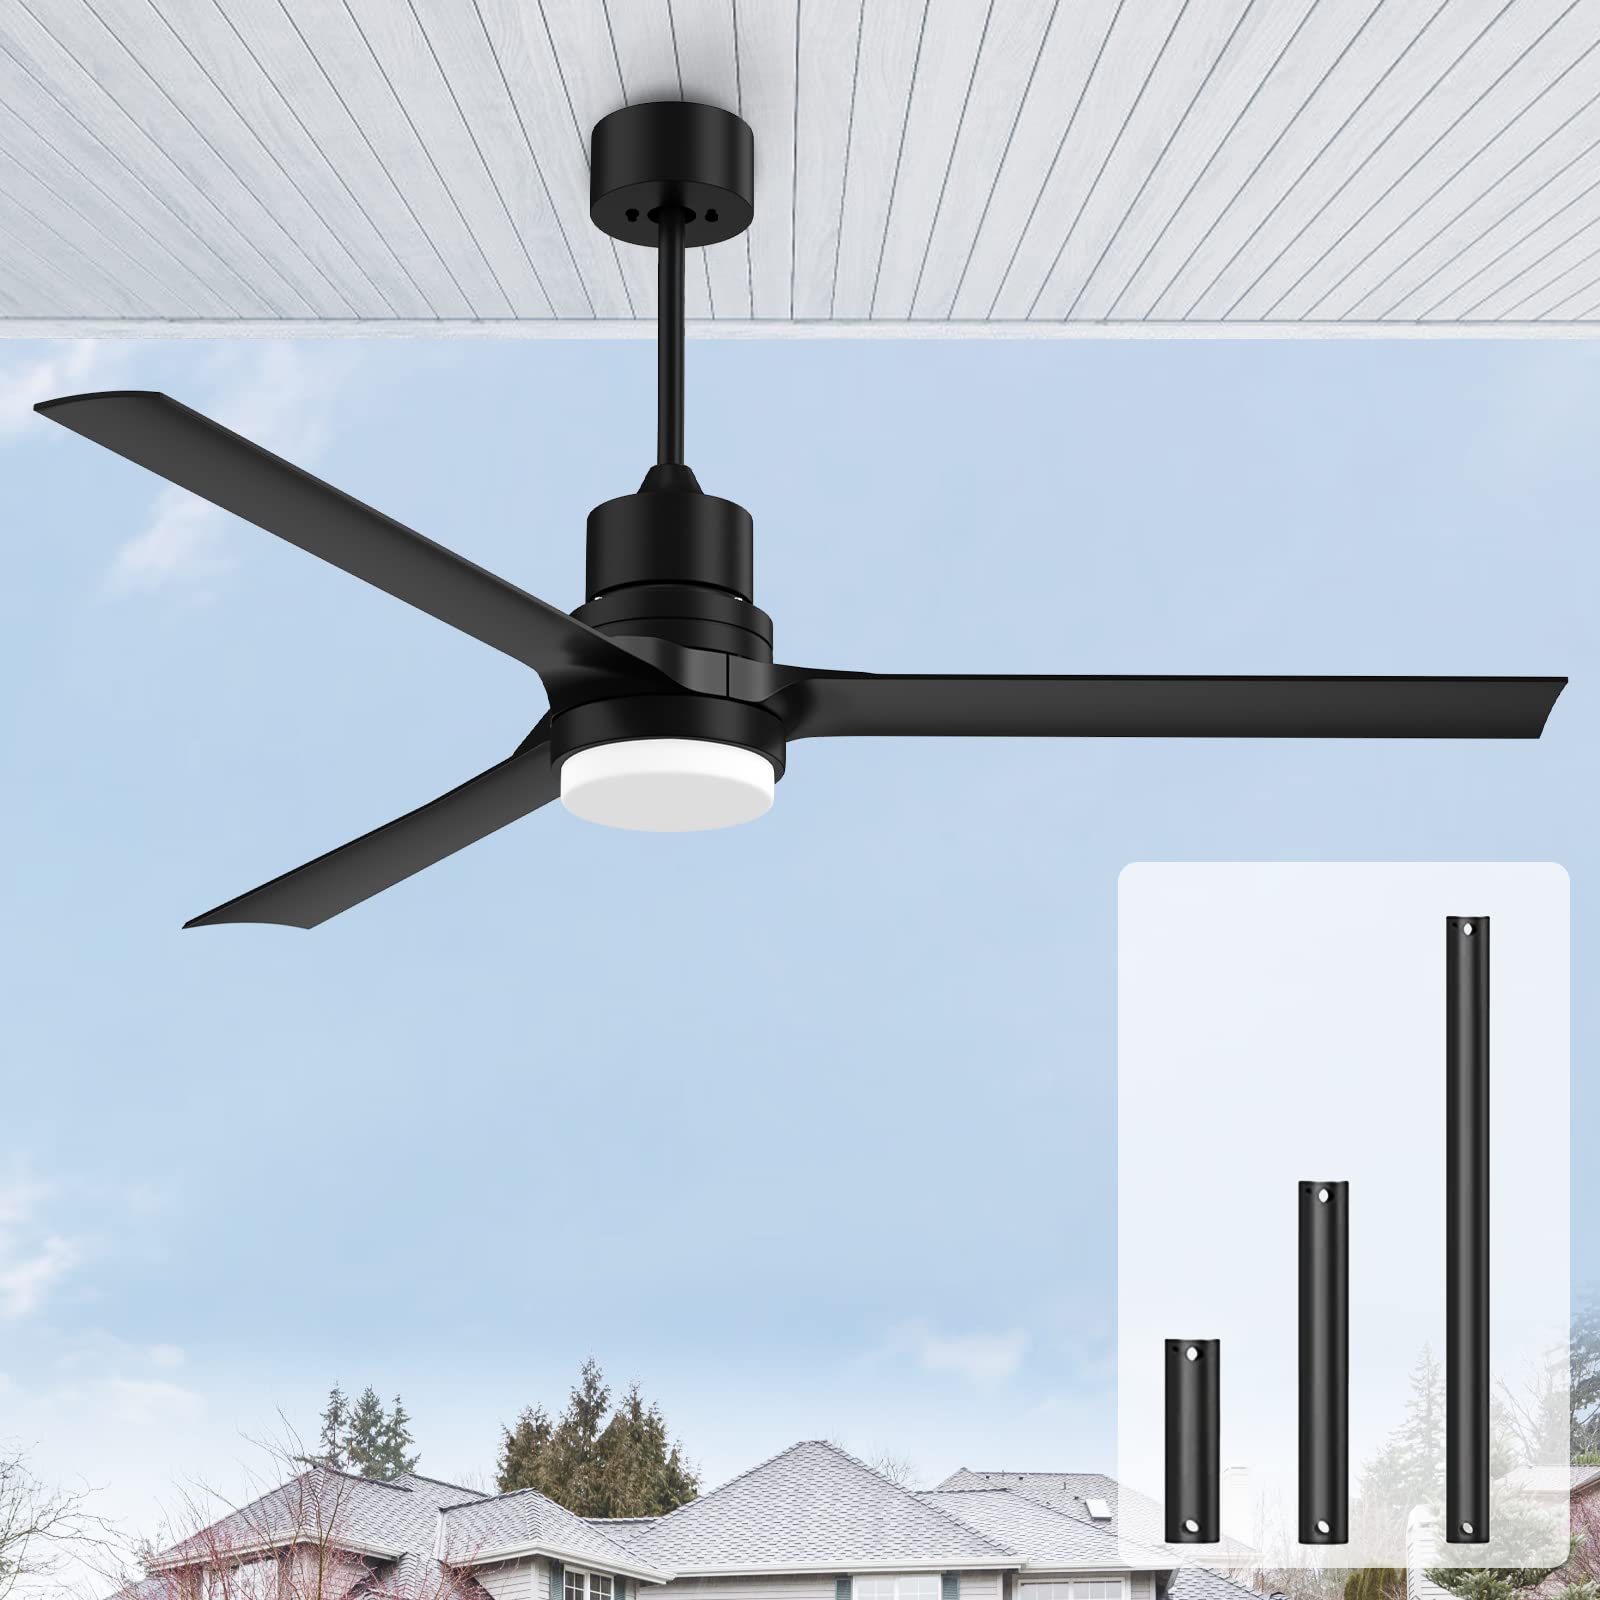 Biukis Black 60-inch Modern Ceiling Fans with Lights,Remote Control Reversible DC Motor for Indoor and Outdoor,Patio Bedroom Living Room